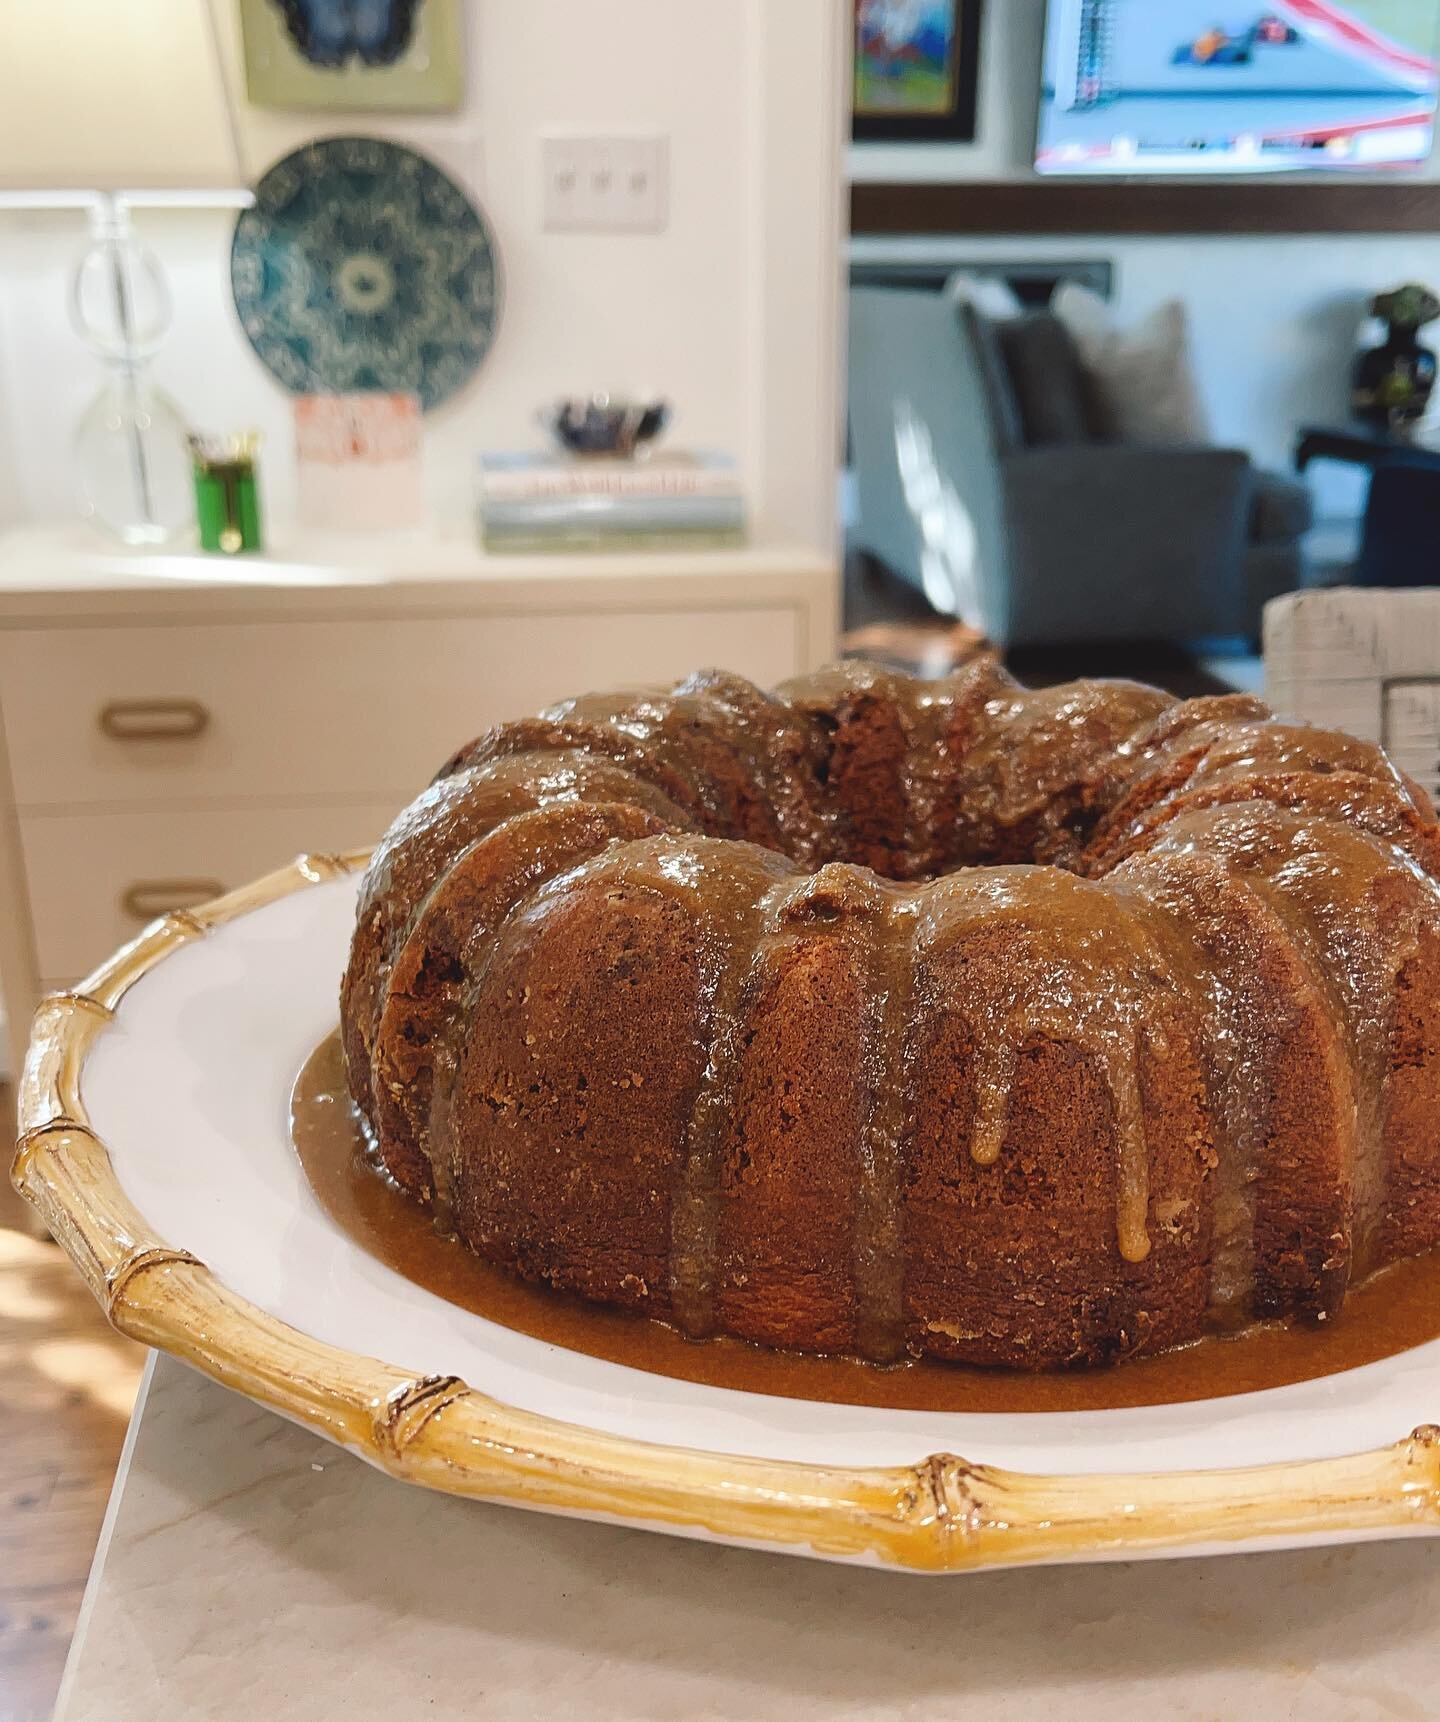 Tucker Family Fav 🤎 Caramel Butterscotch Cake. requirement: must be made in the fall.

Cake Ingredients:
1 box Duncan Hines Yellow Cake Mix
2-3.4oz butterscotch pudding mix
1 1/4 cup water
1/3 cup vegetable oil
4 eggs
1 cup butterscotch chips

Icing